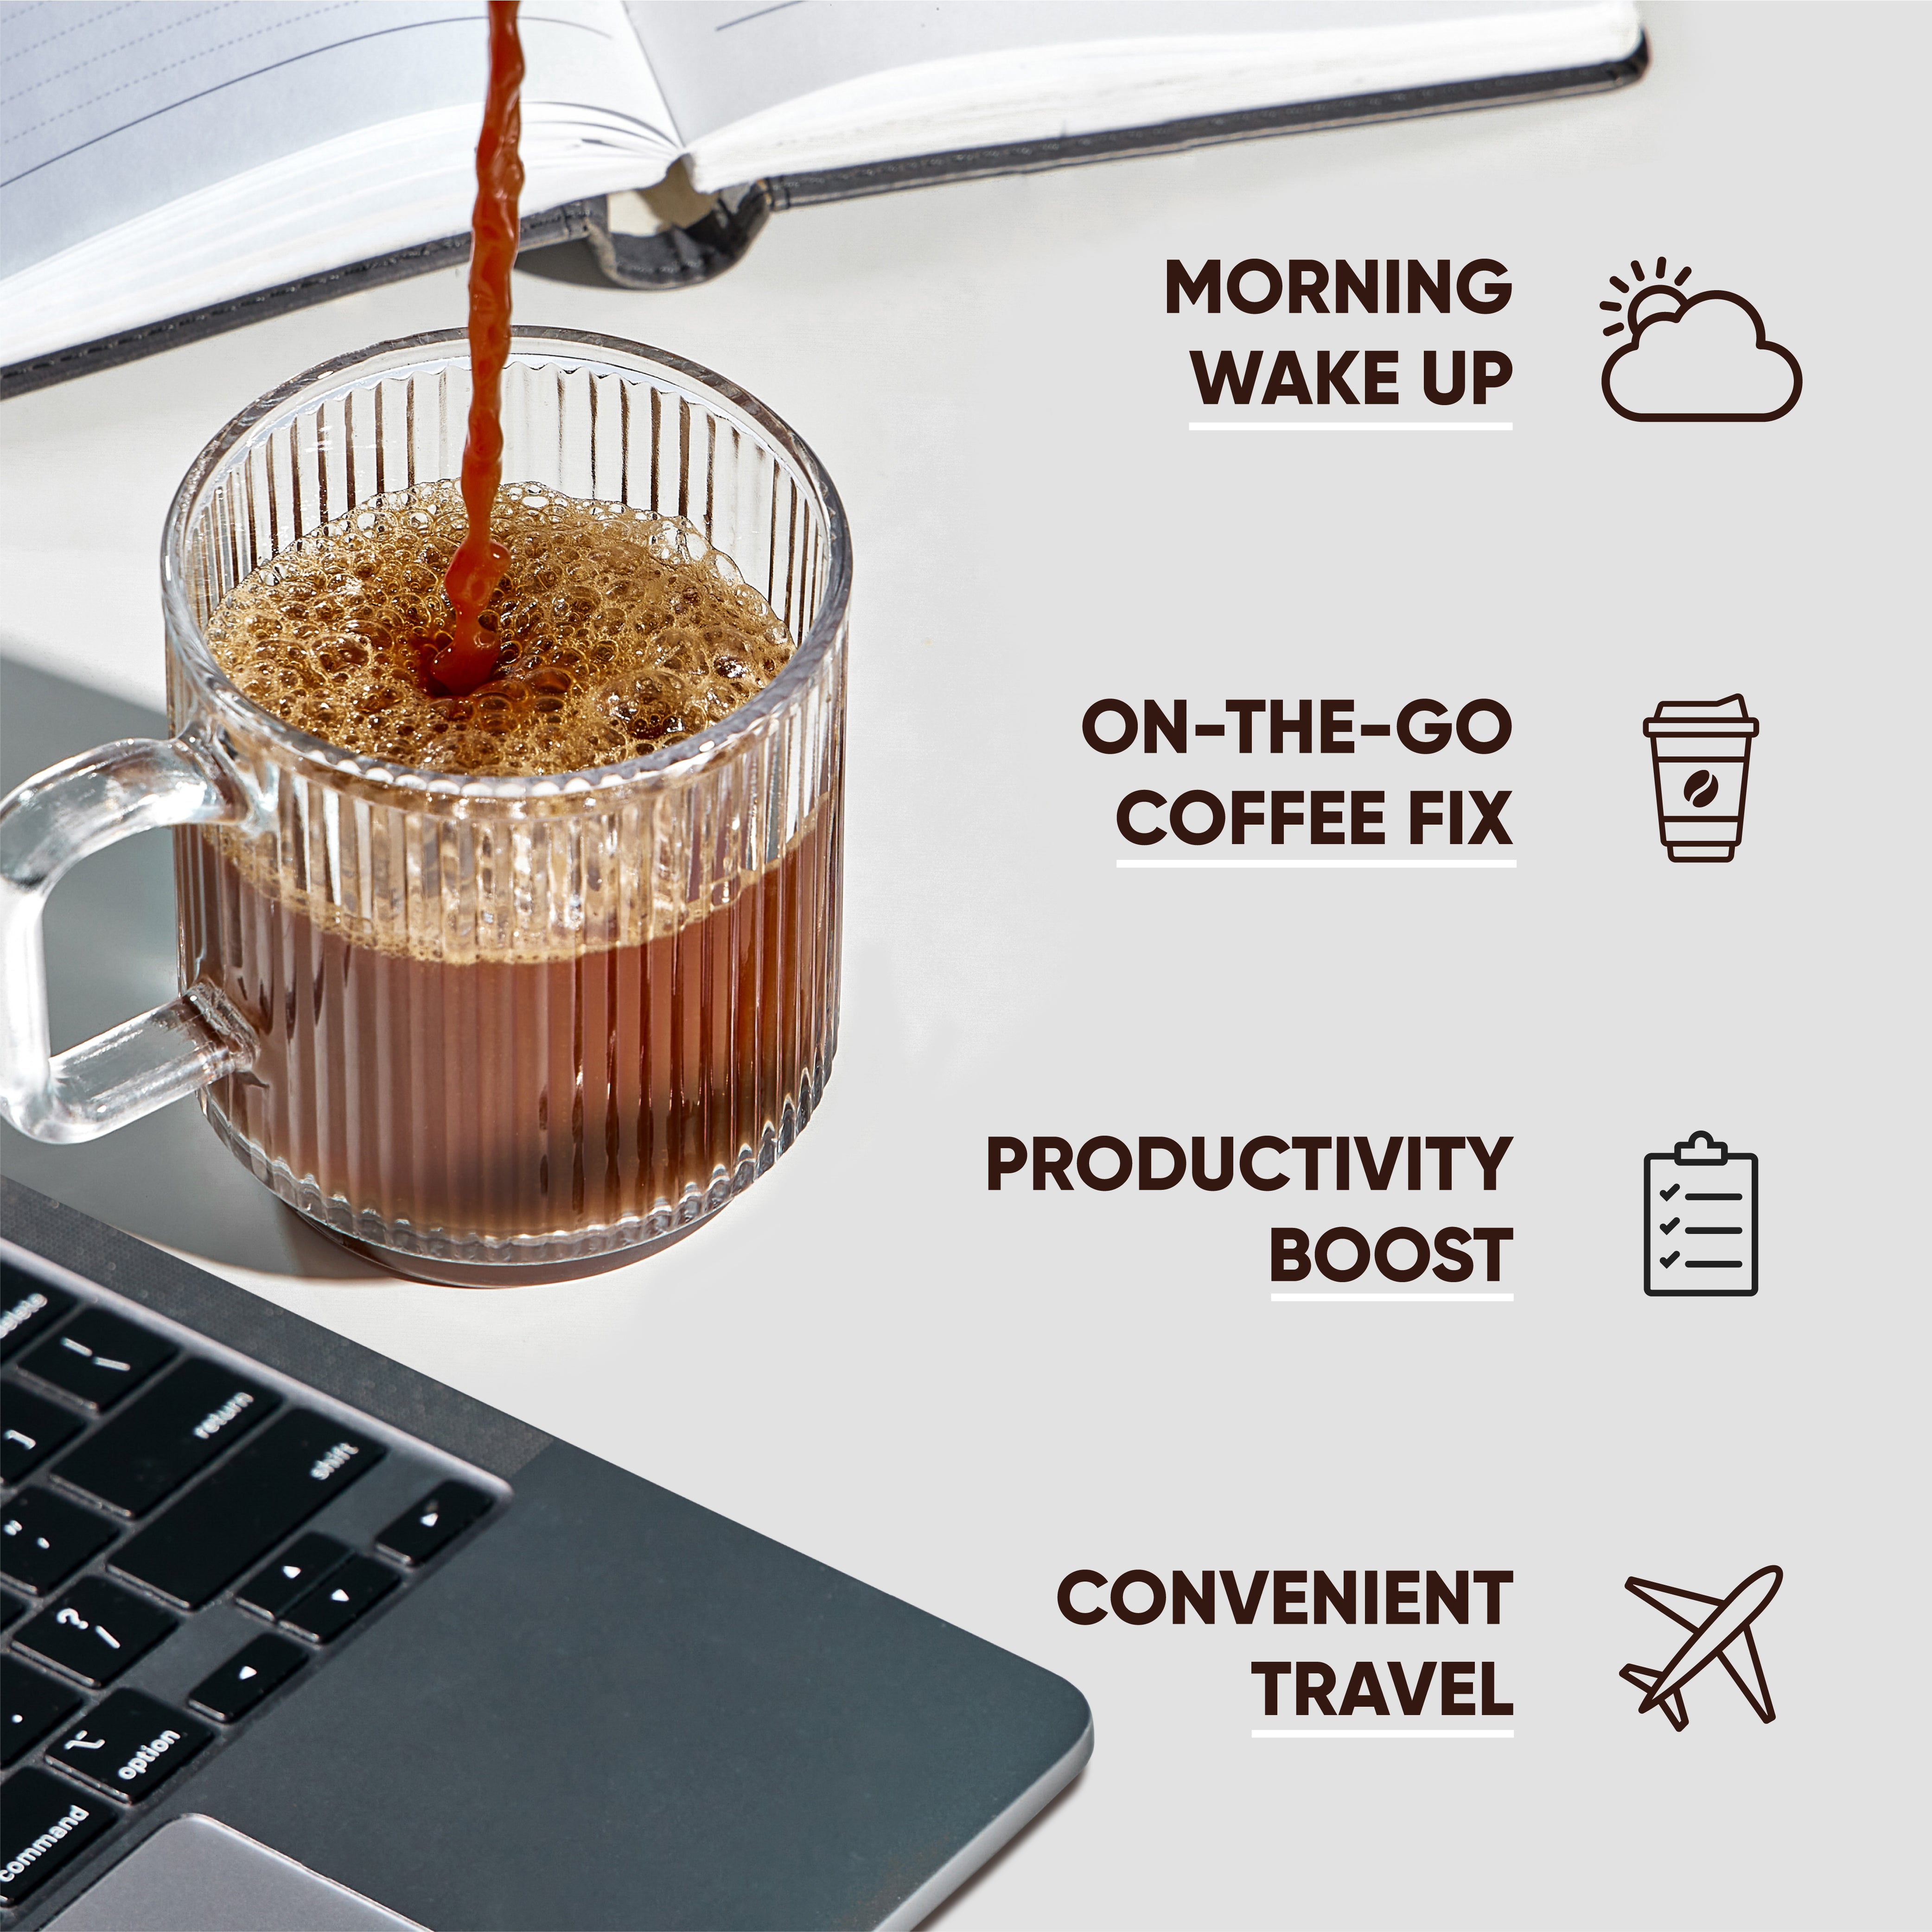 IQJOE Vanilla Spice Mushroom Coffee.  Instant Coffee is great for: walking up in the morning, on-the-go coffee, productivity boost, convenient travel.